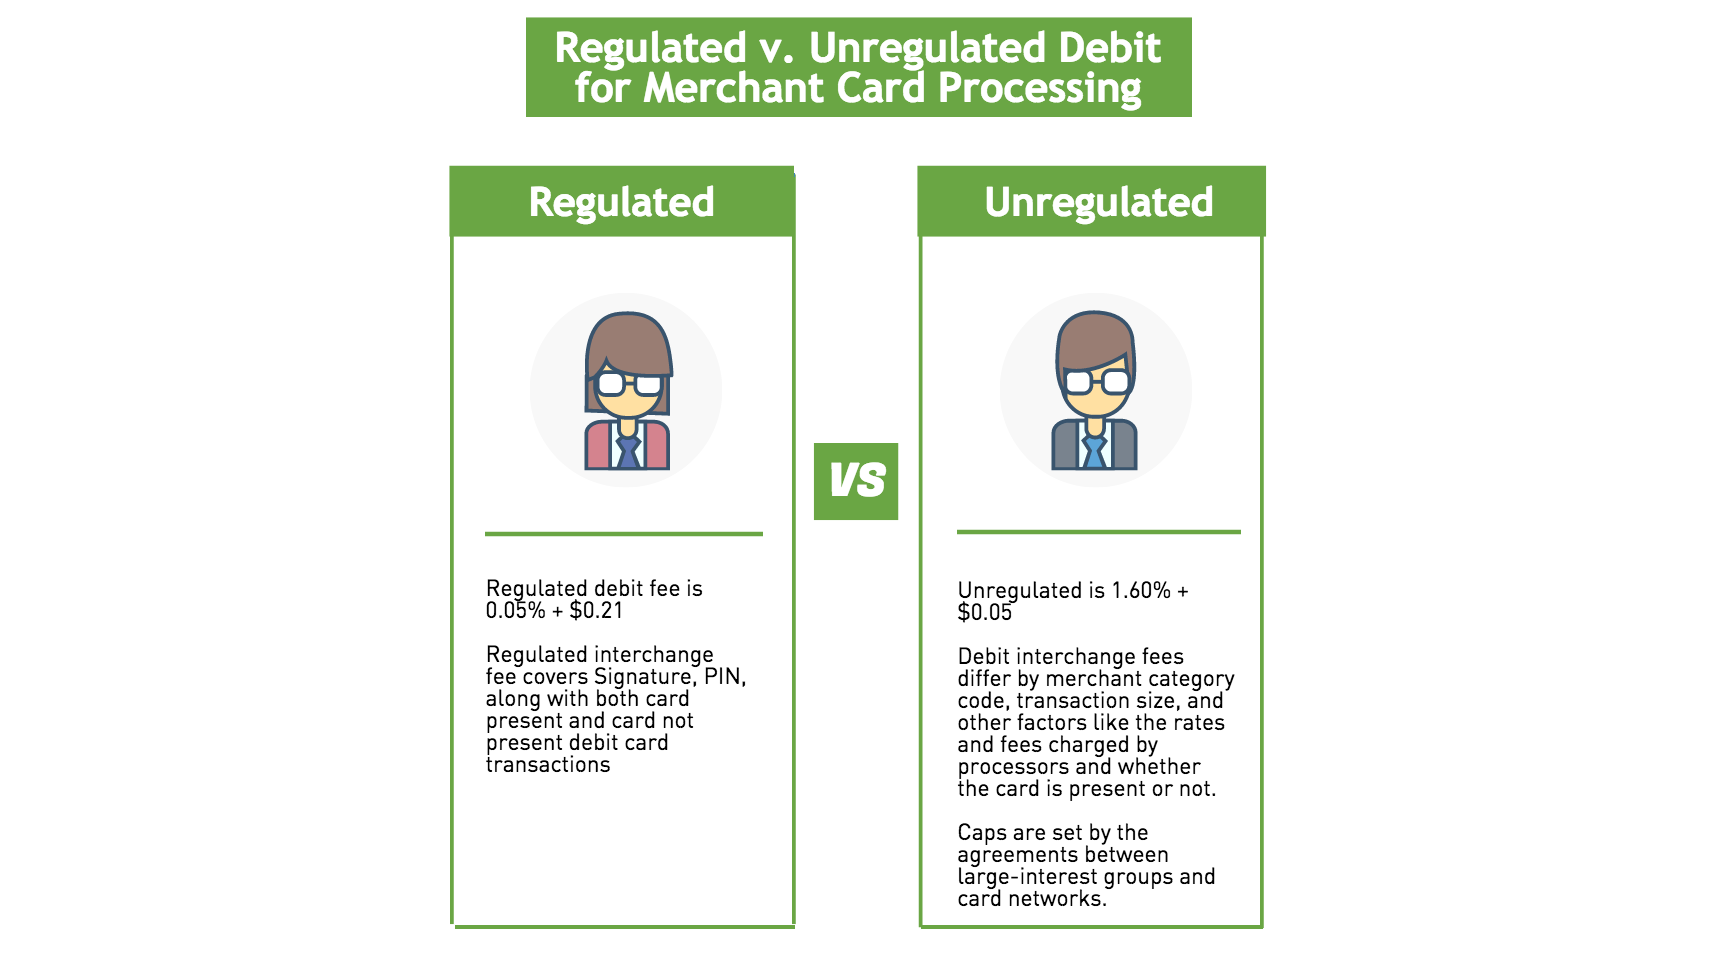 regulated-v-unregulated-debit-for-merchant-card-processing